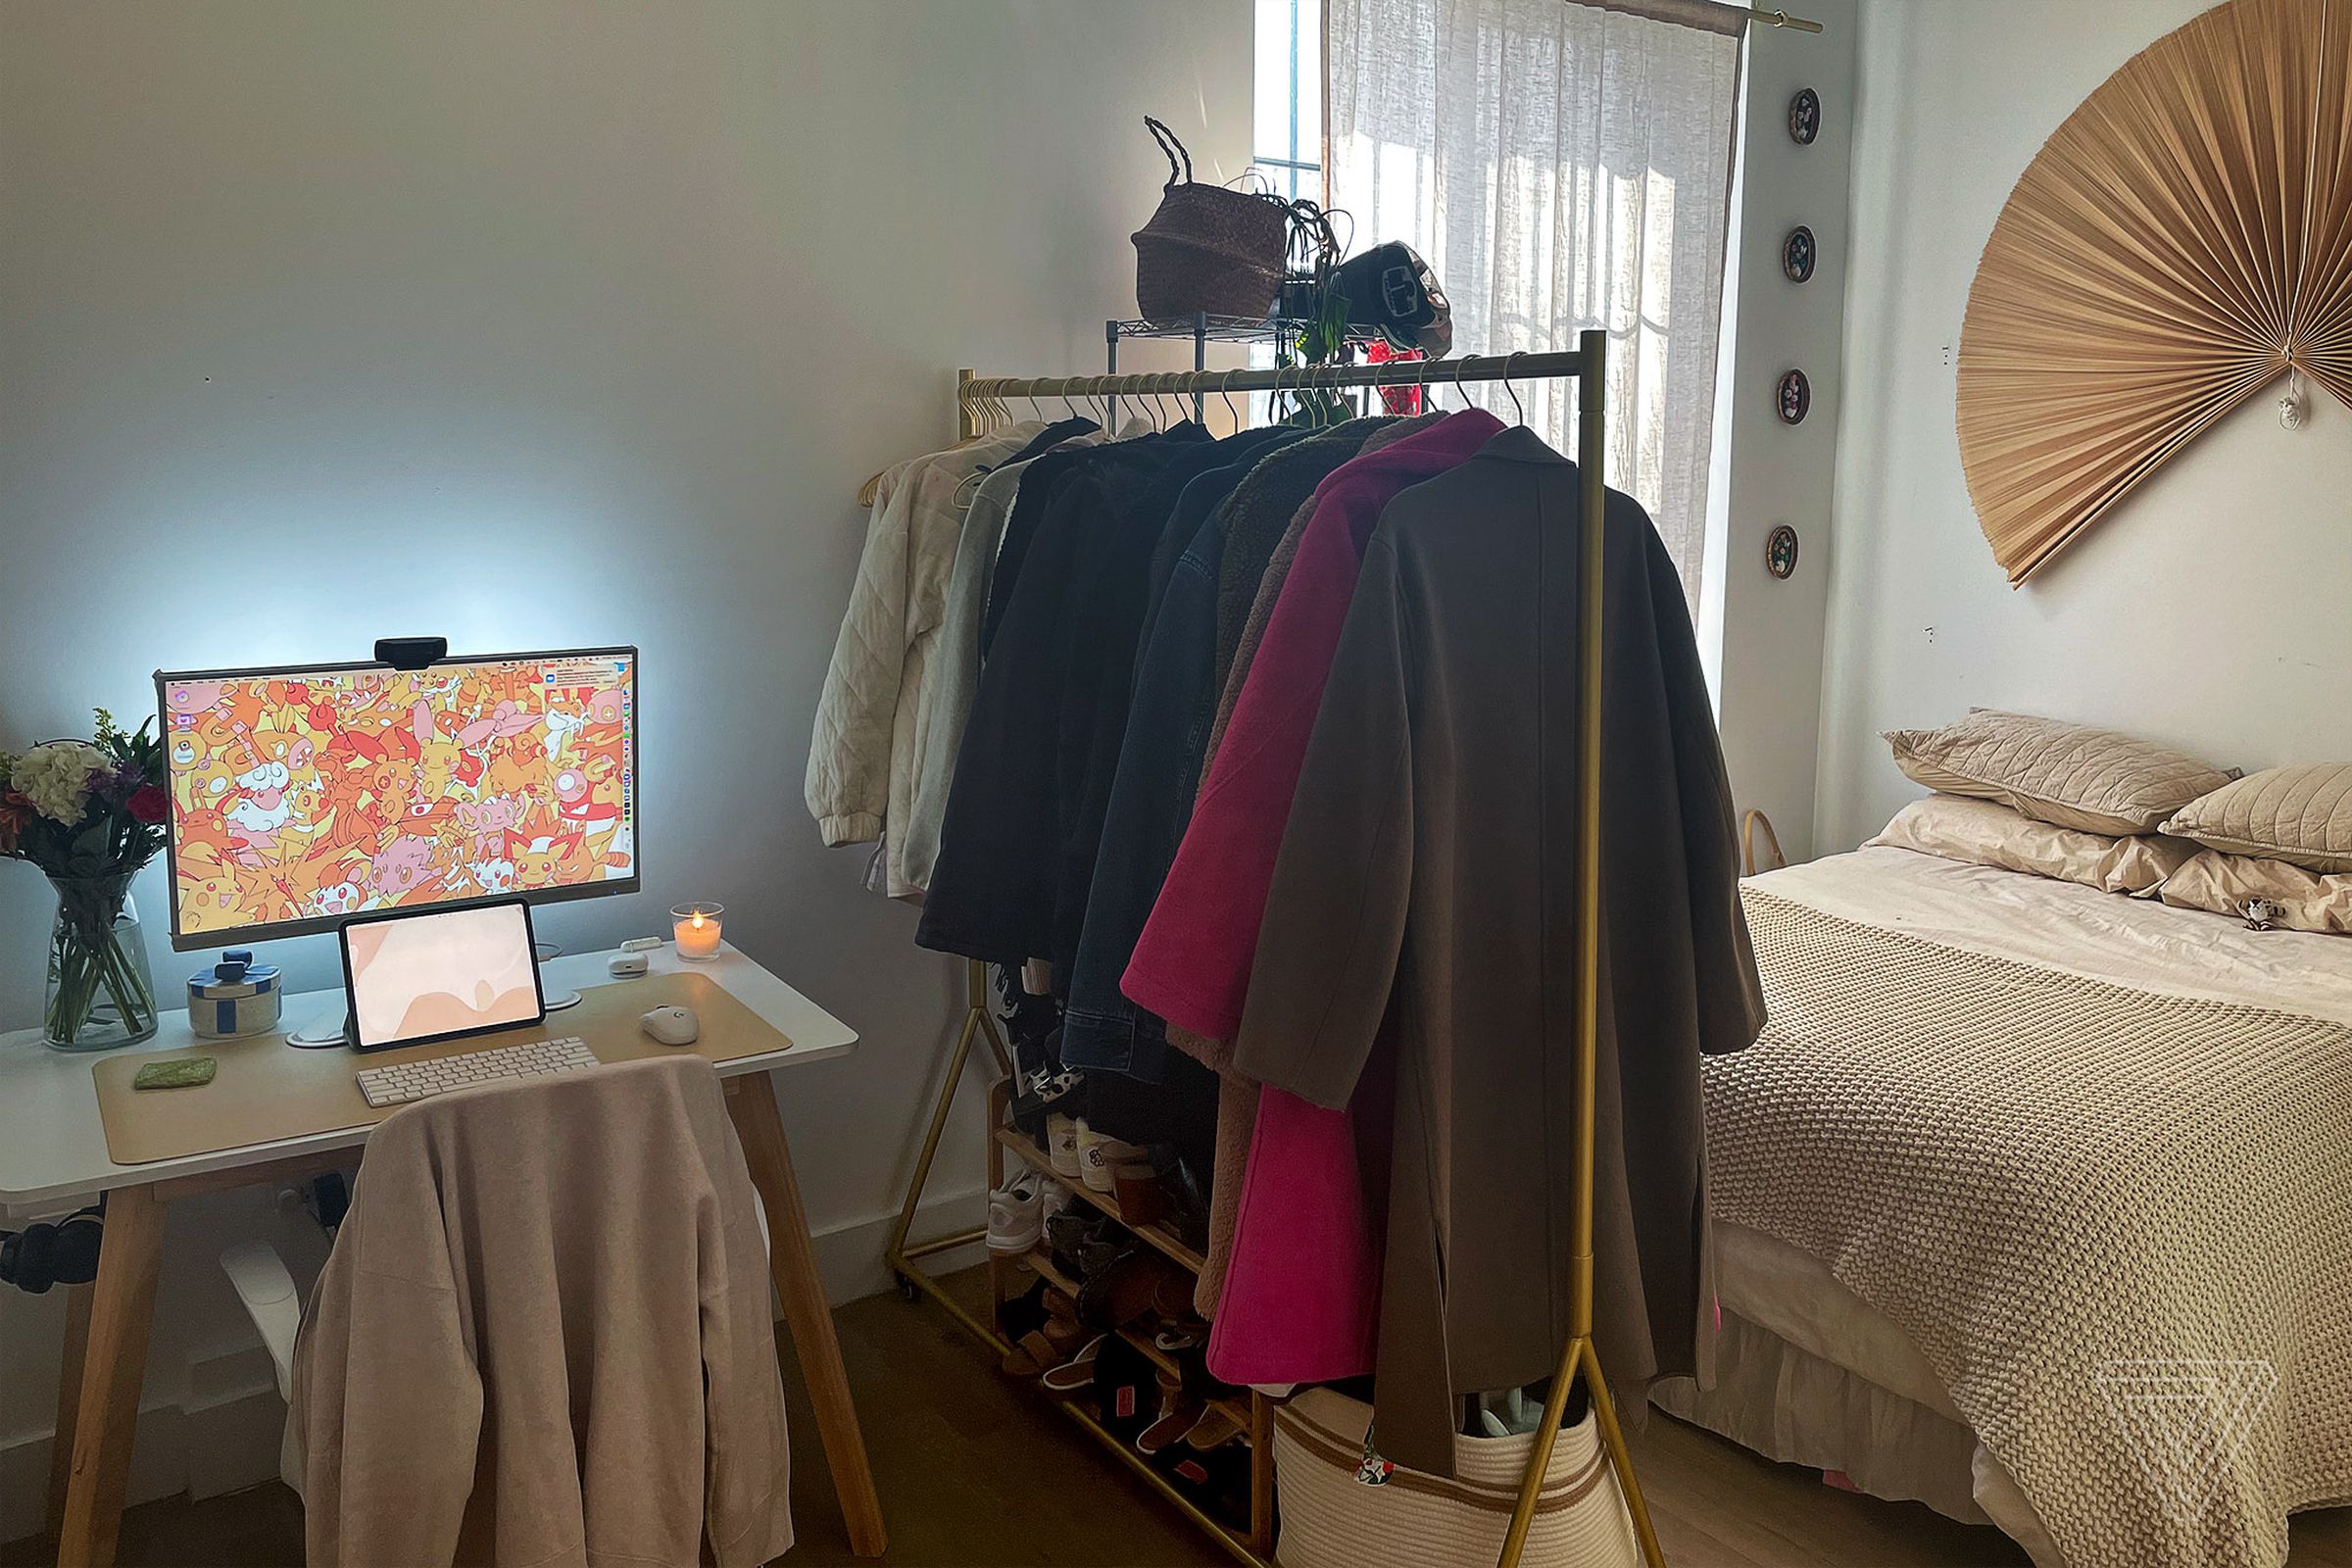 A hanging rack creates a separate work area.